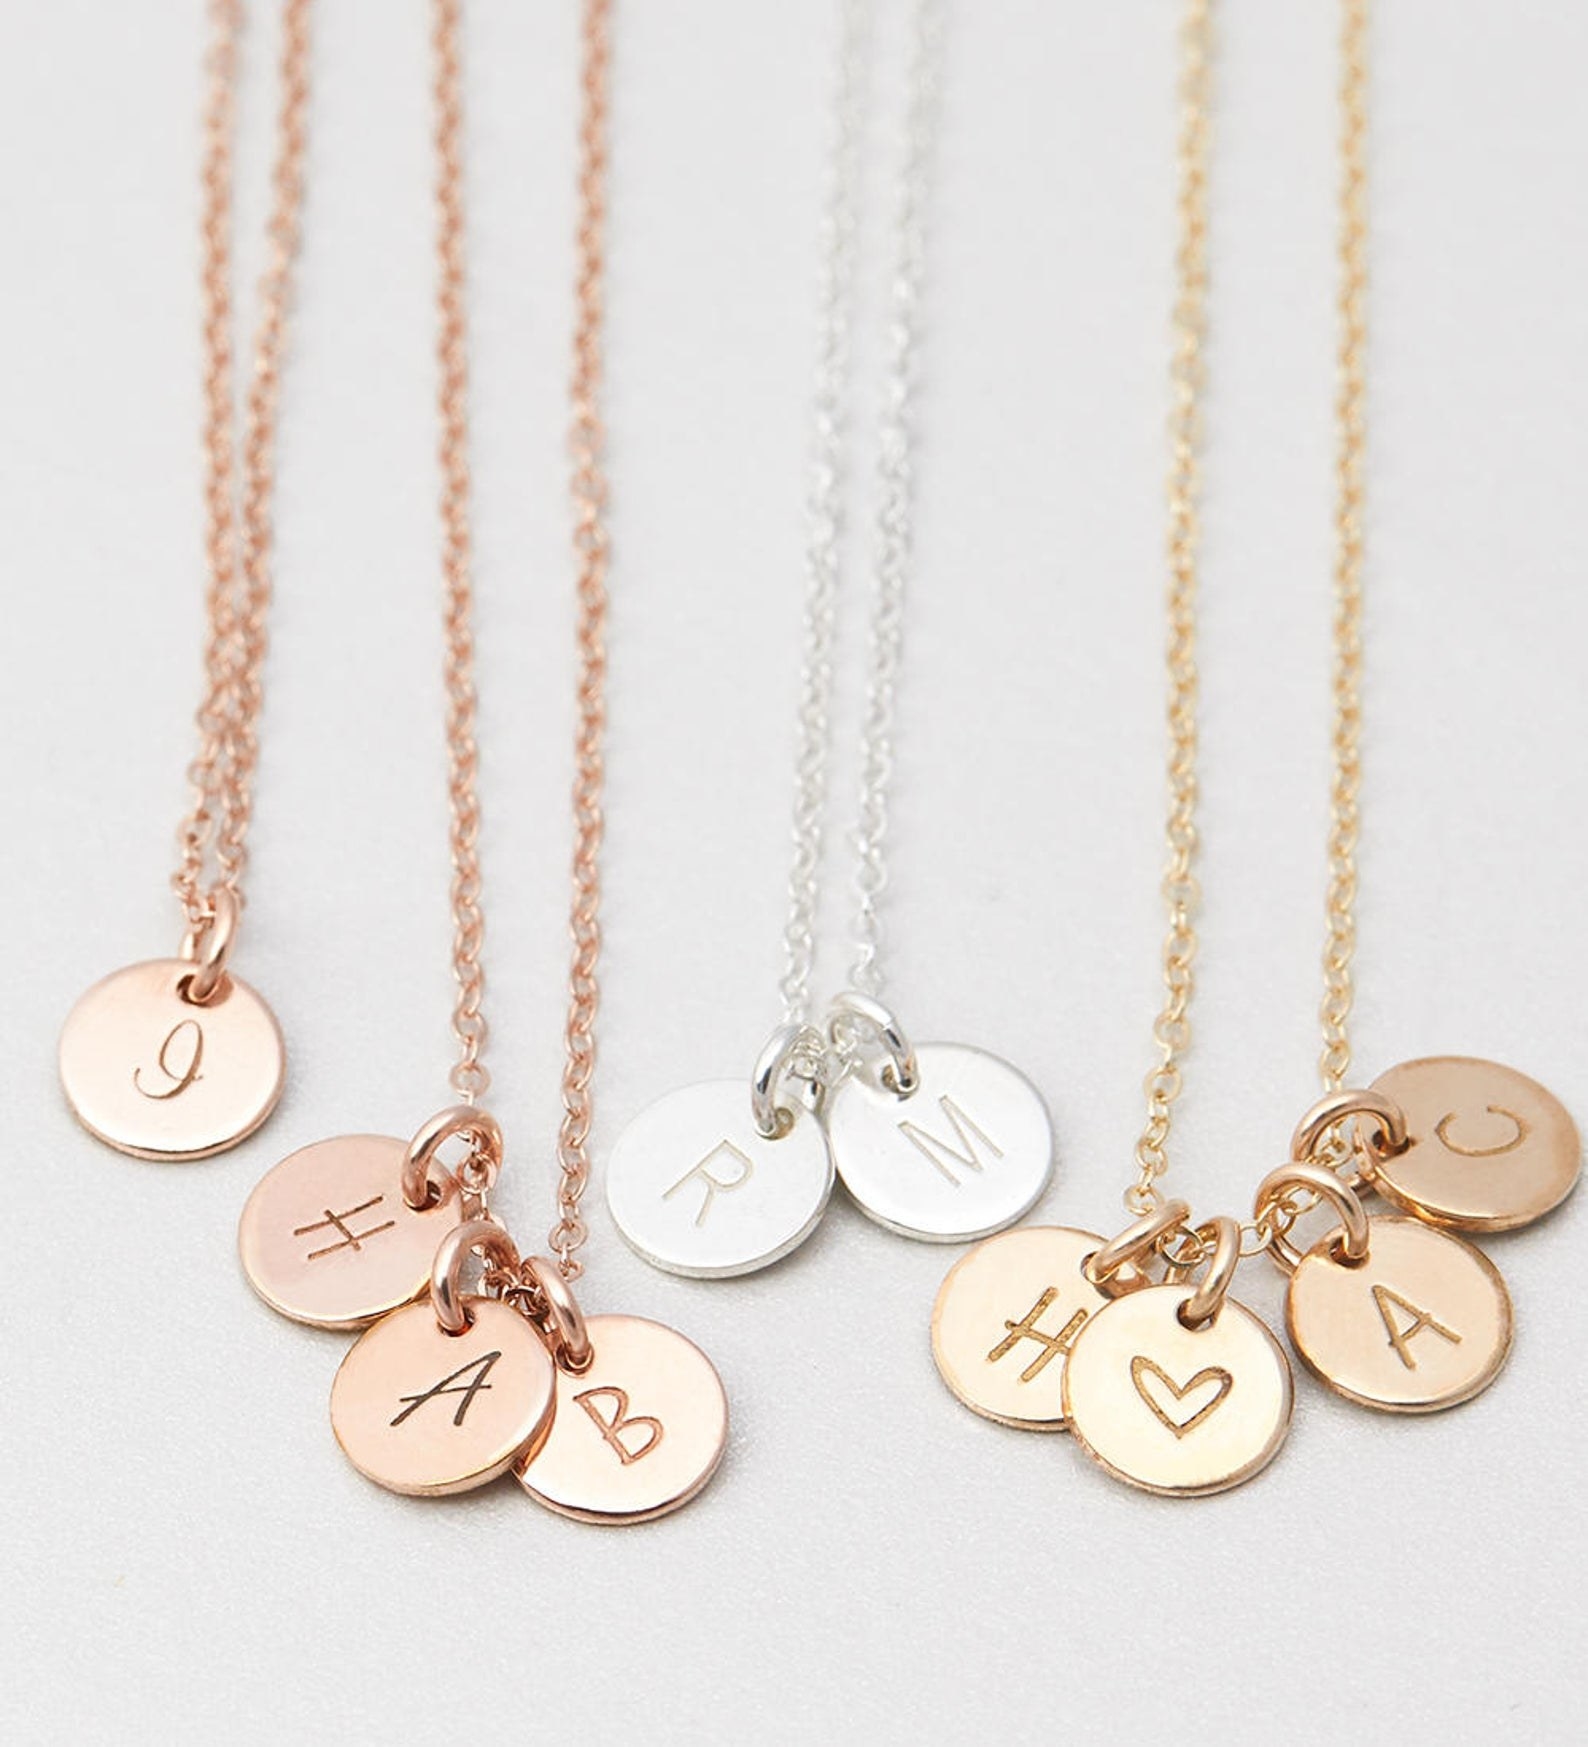 necklaces in gold, rose gold, and silver